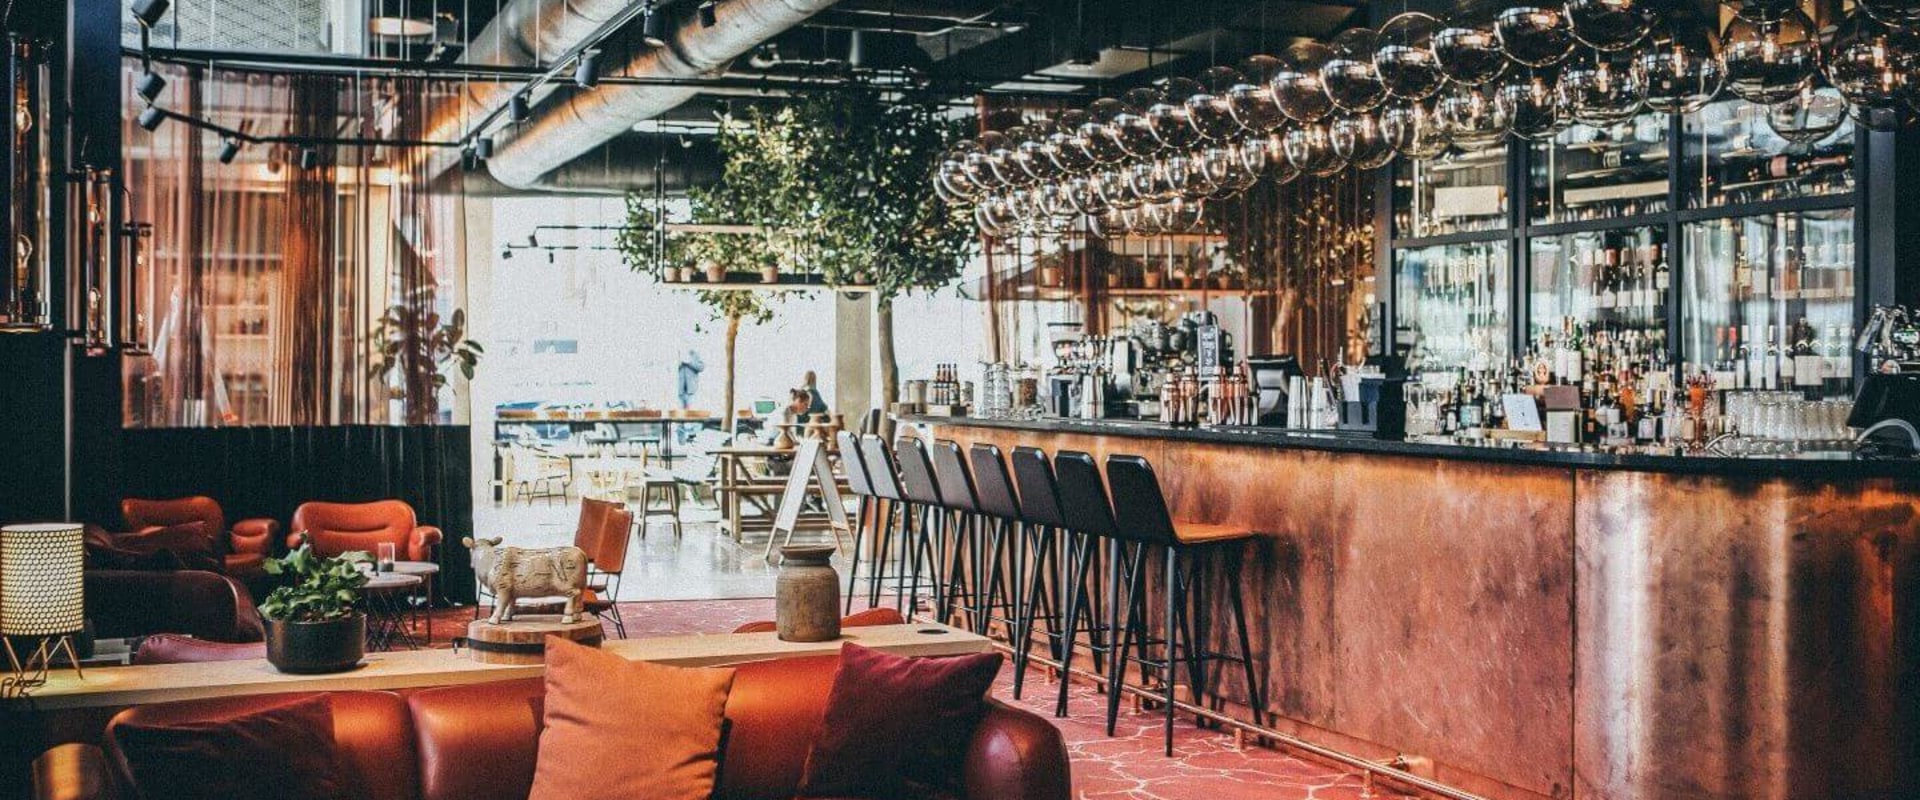 The Benefits of Adding a Bar to Your Restaurant or Hotel